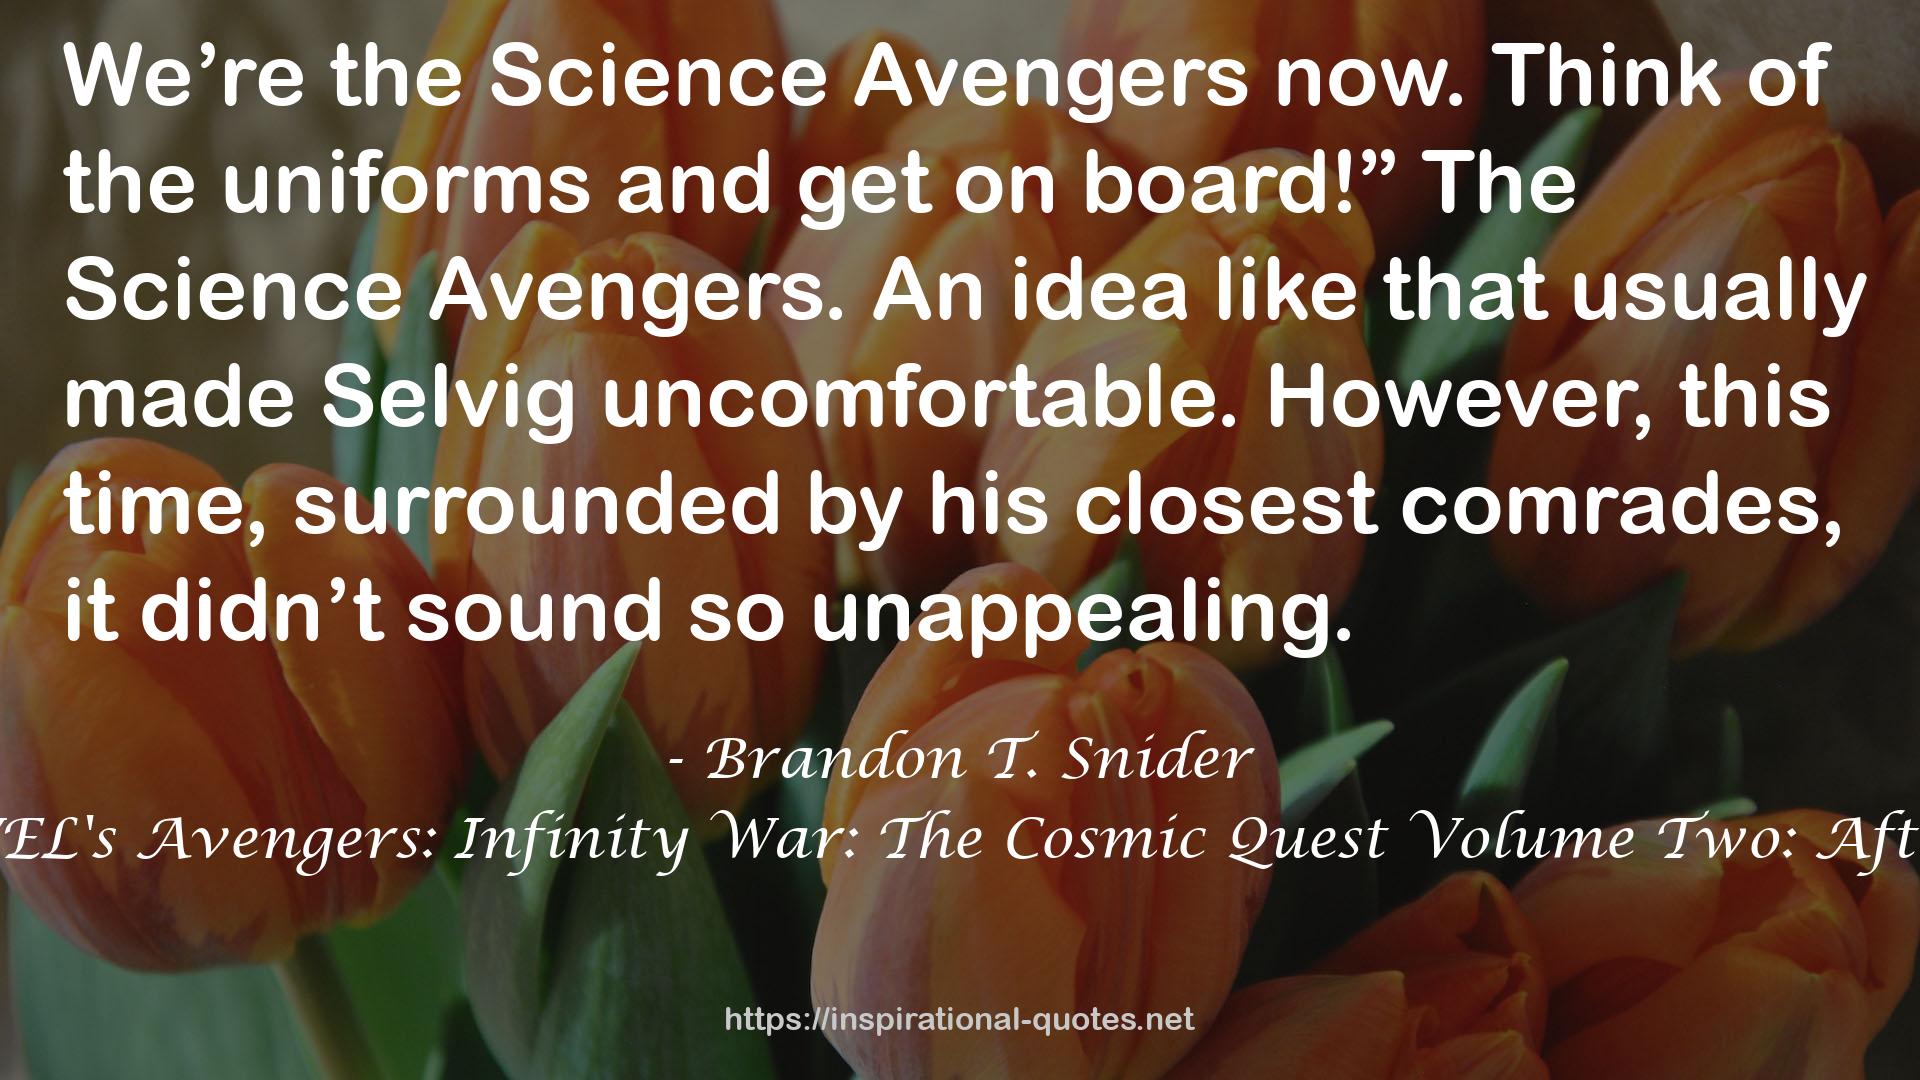 MARVEL's Avengers: Infinity War: The Cosmic Quest Volume Two: Aftermath QUOTES